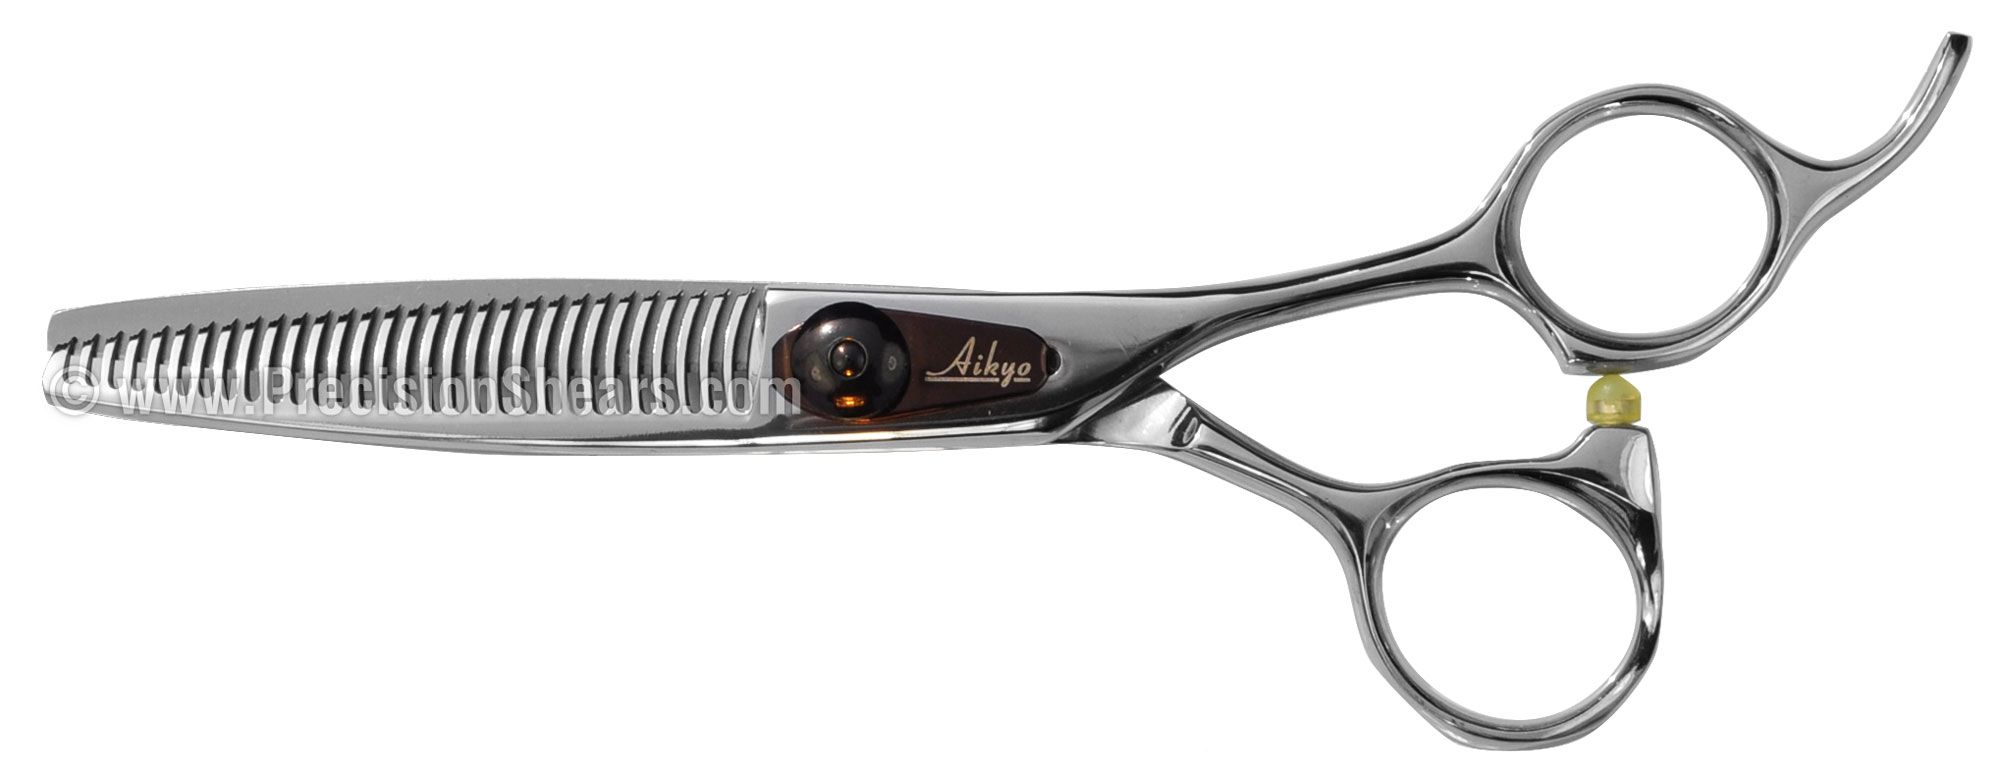 Aikyo FT 30 Thinning Scissors 30-35-40-50 Tooth